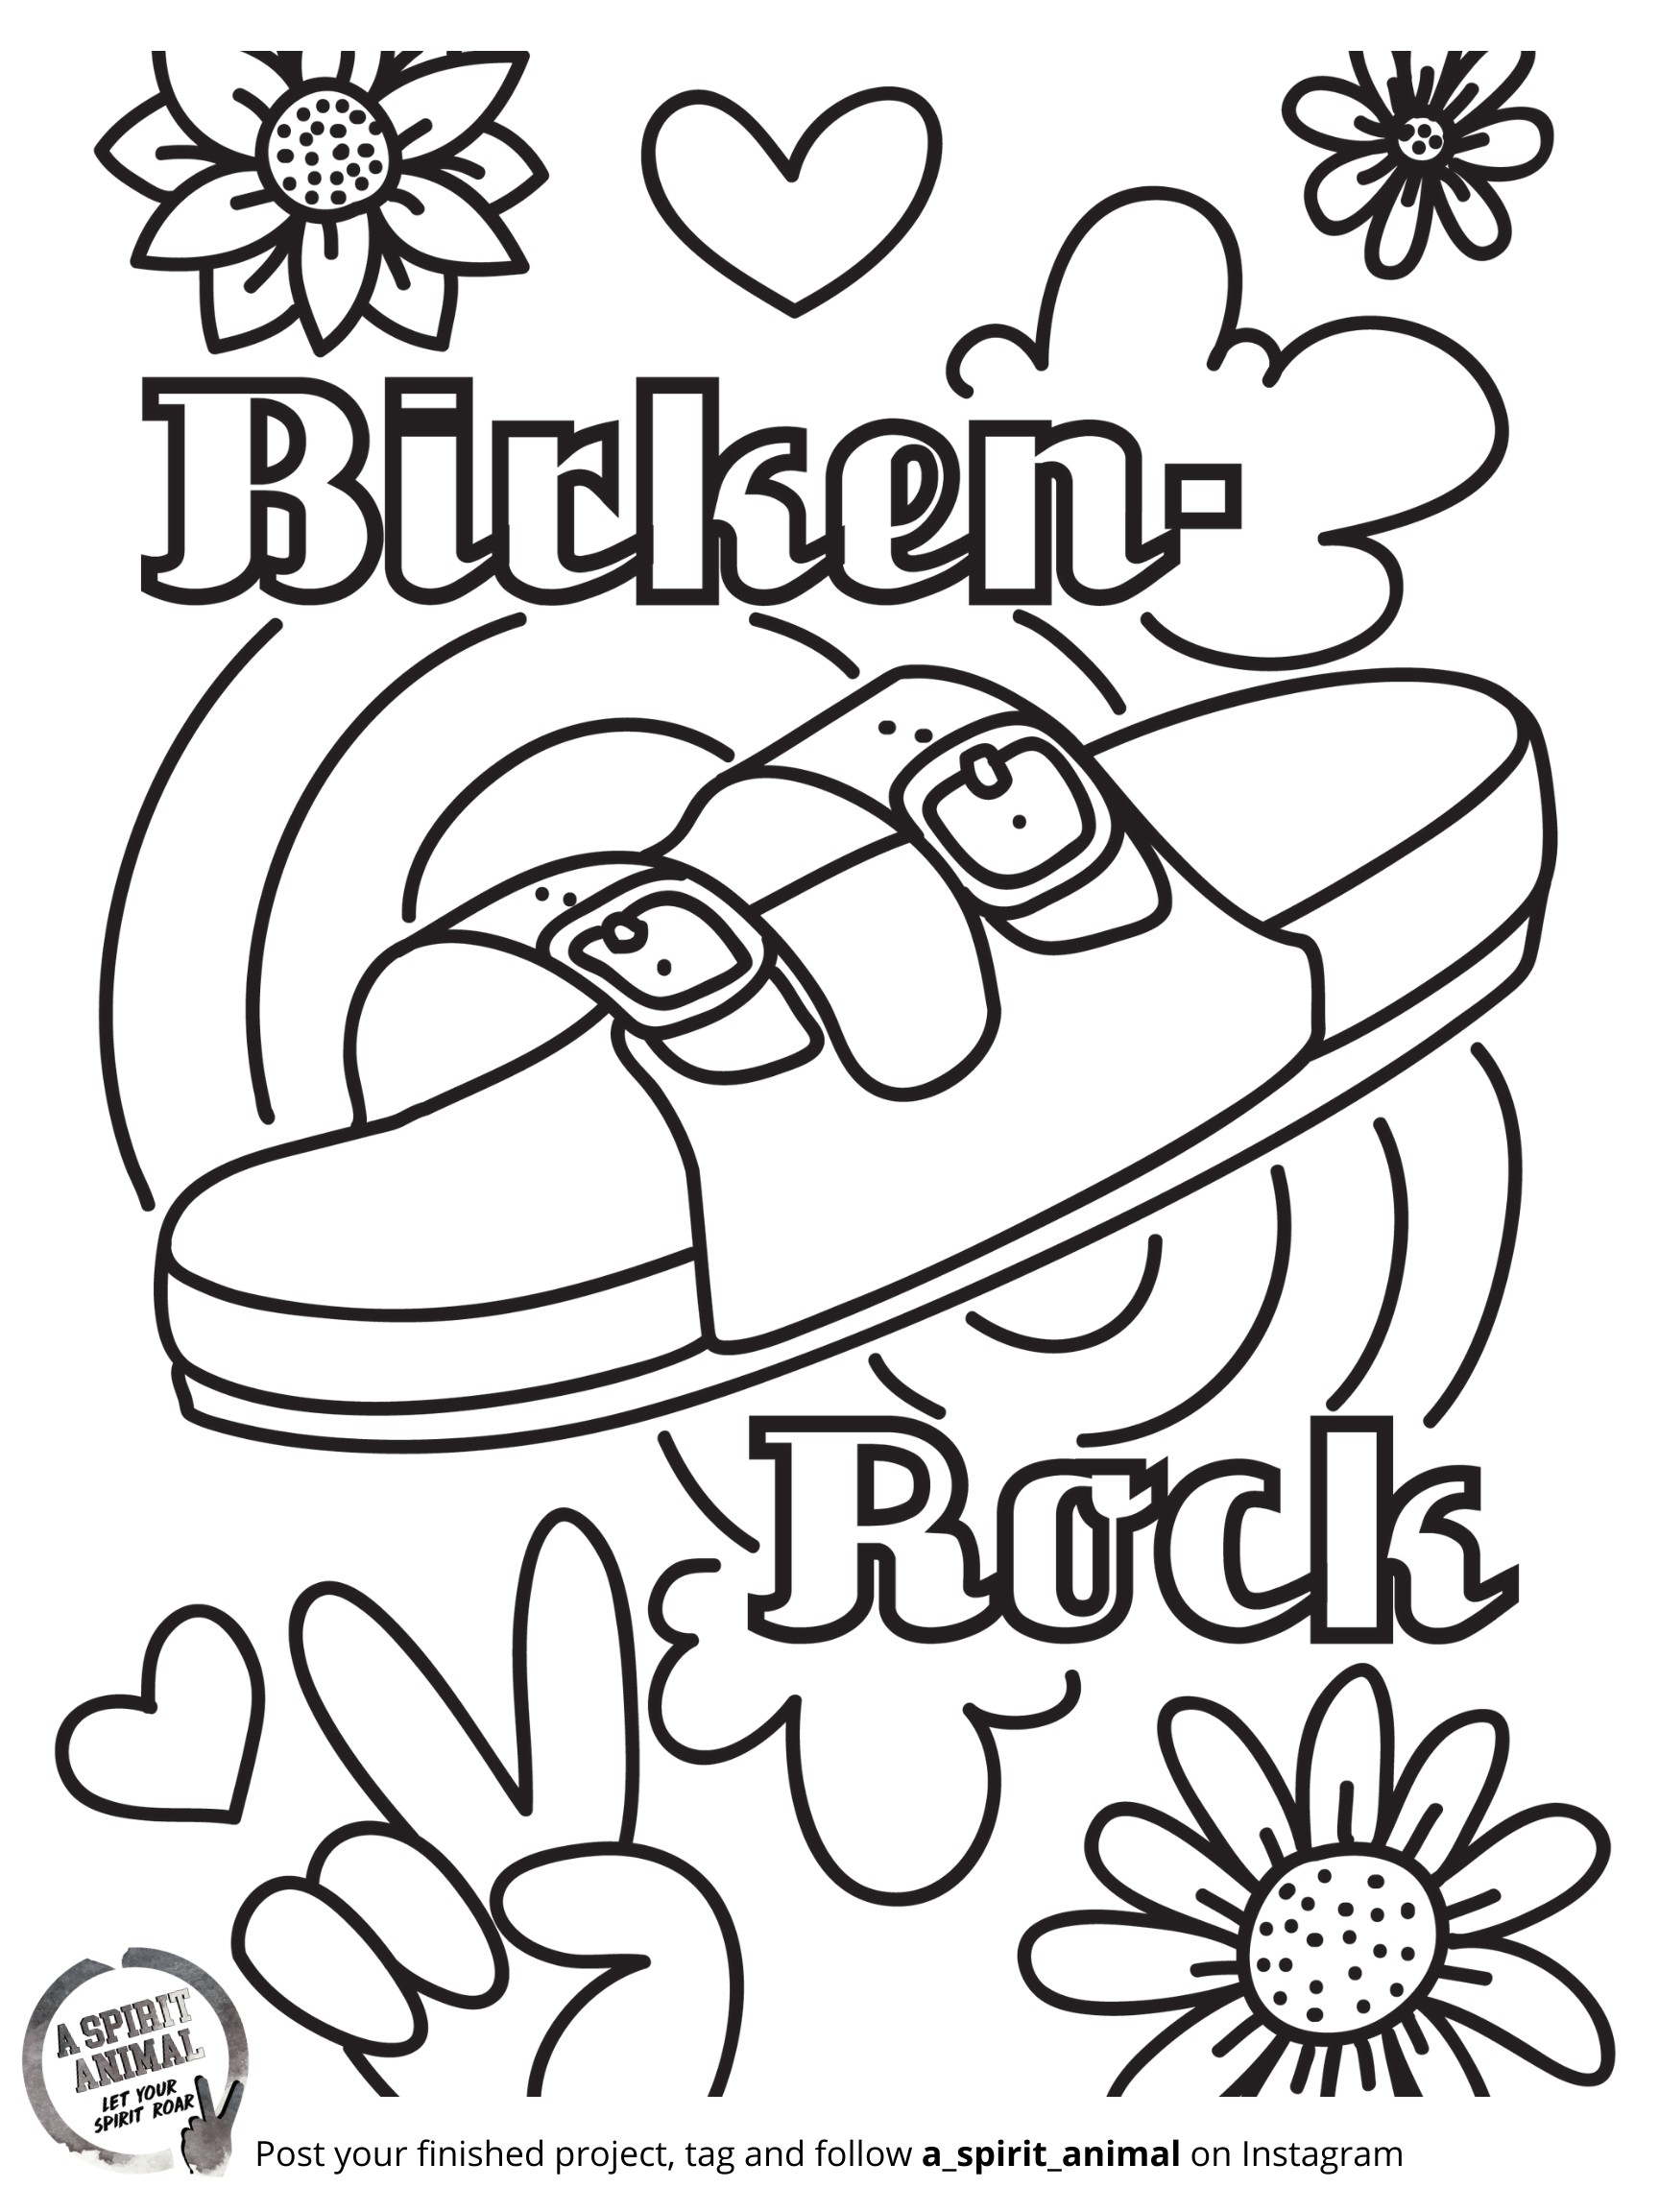 Birkenstocks rock vsco girl a spirit animal free holiday activity coloring pages cute coloring pages coloring pages free coloring pages